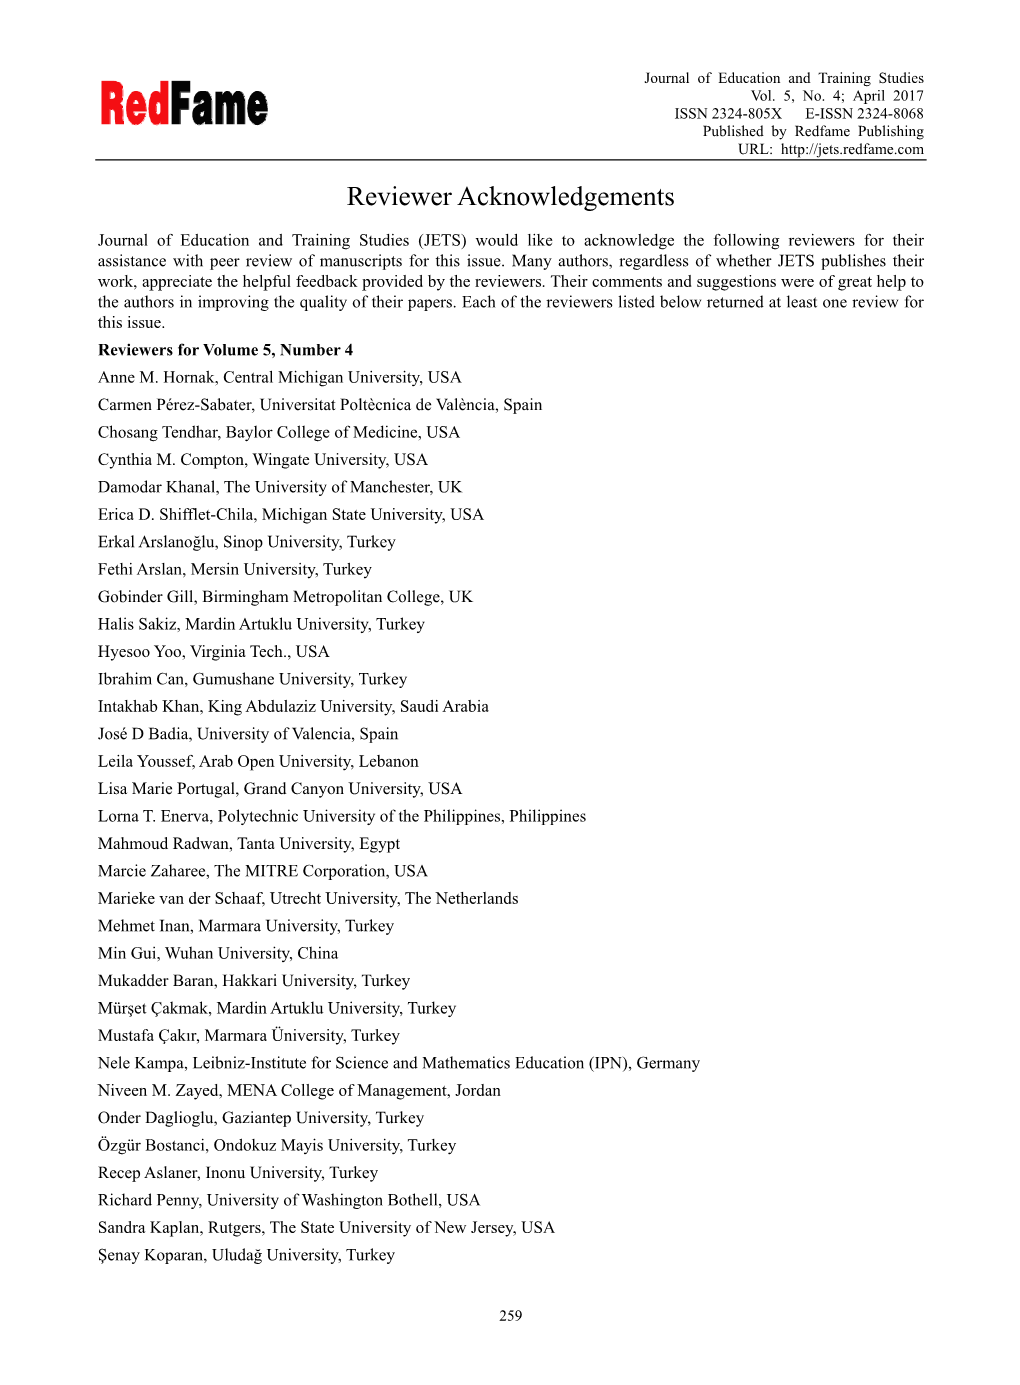 Reviewer Acknowledgements